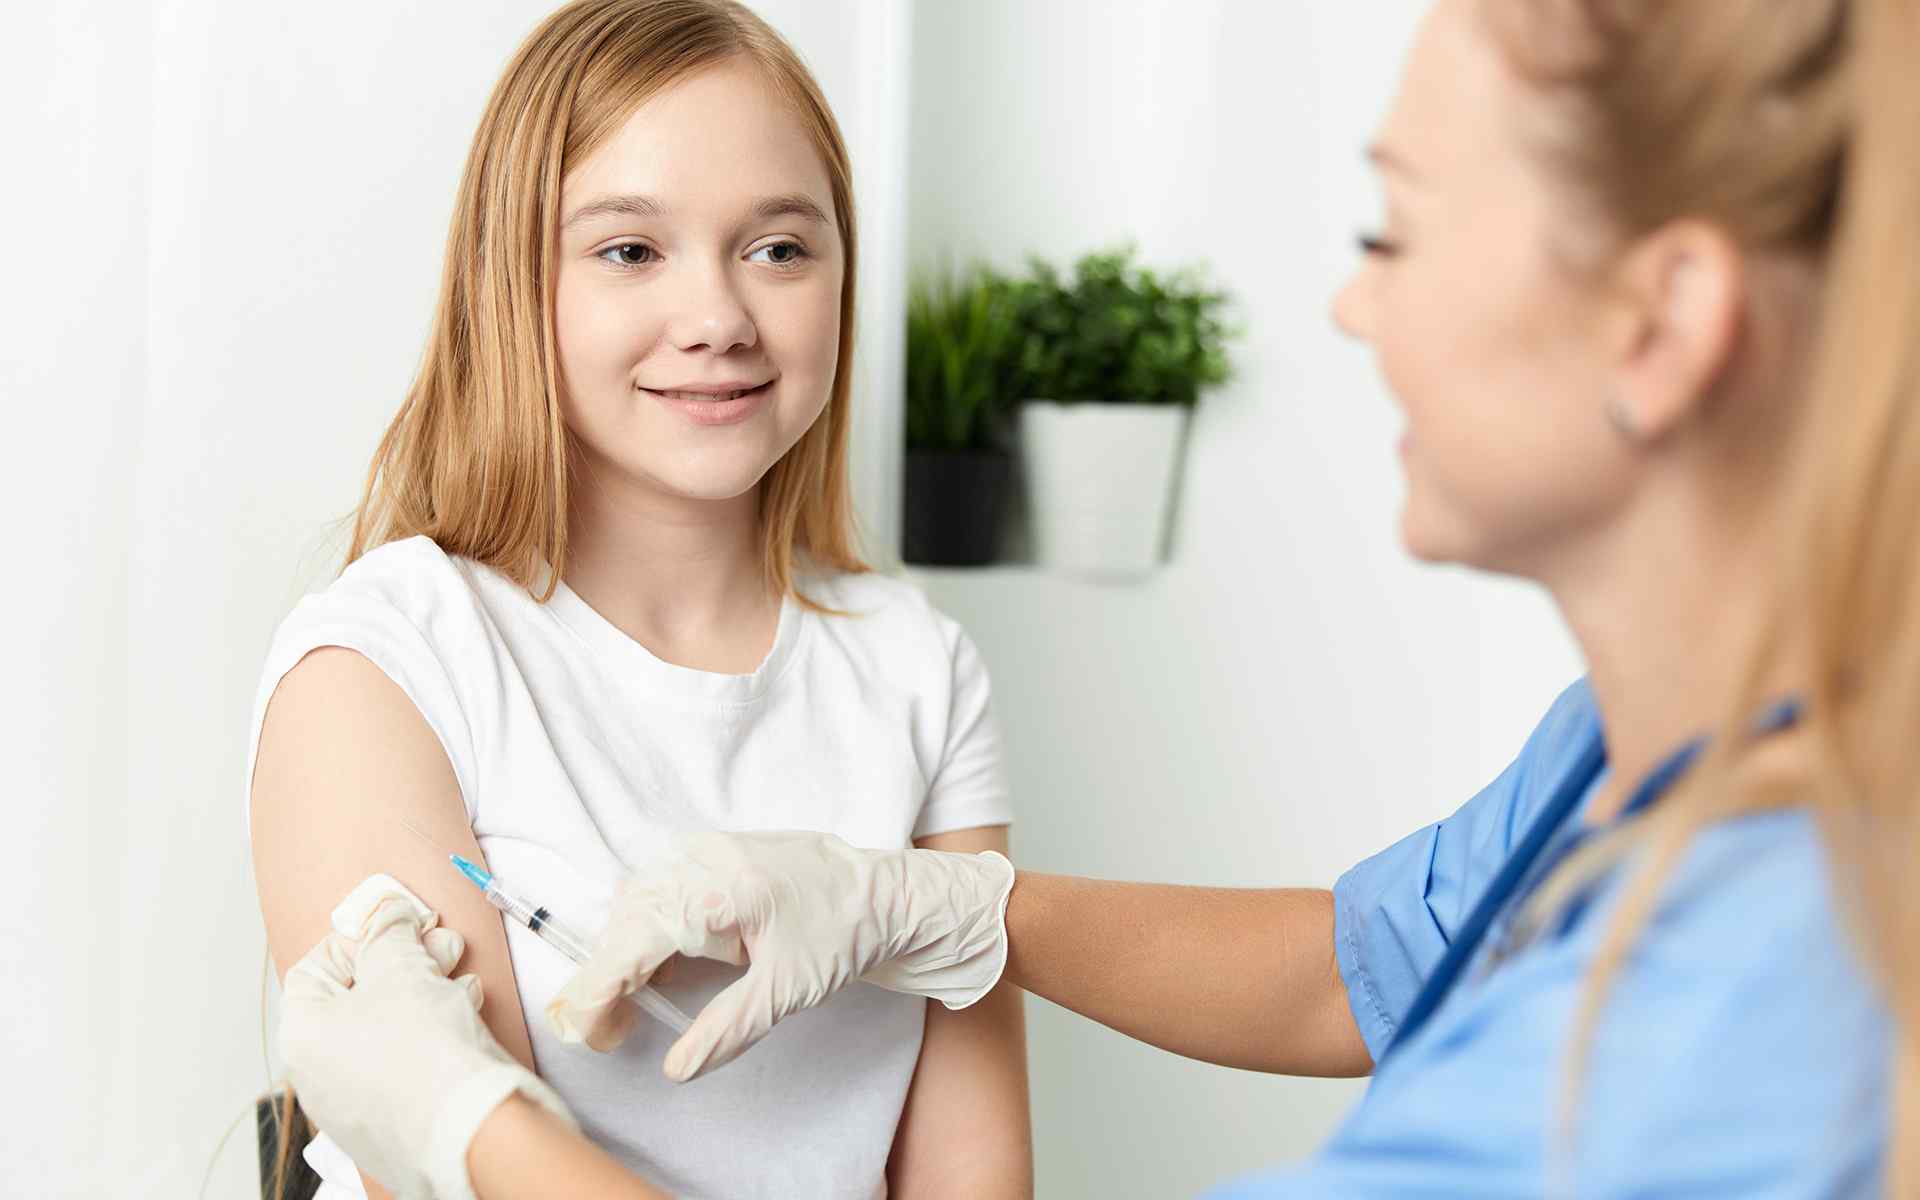 Children Ages 5-11 Eligible for COVID-19 Vaccine Boosters